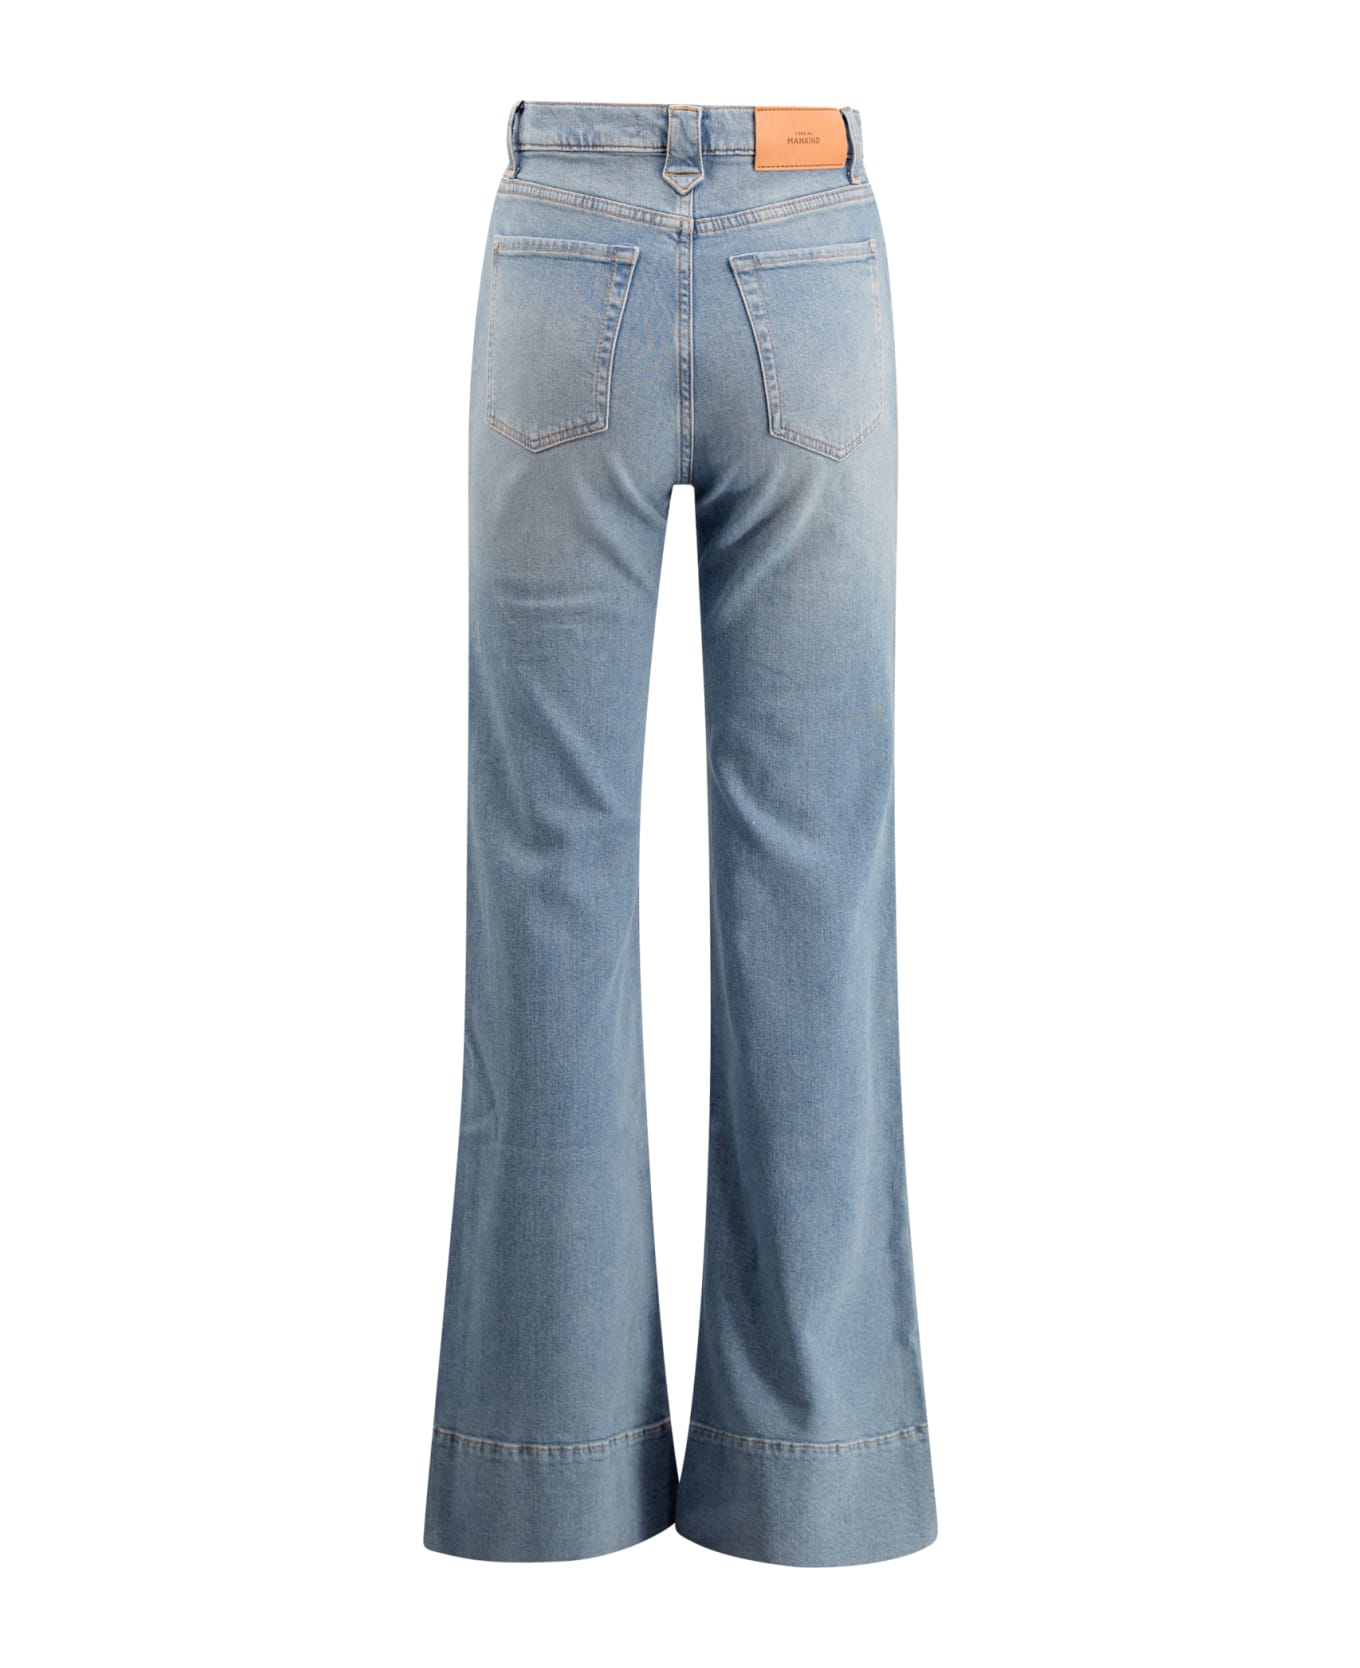 7 For All Mankind High-waisted Flared Jeans - Denim ボトムス